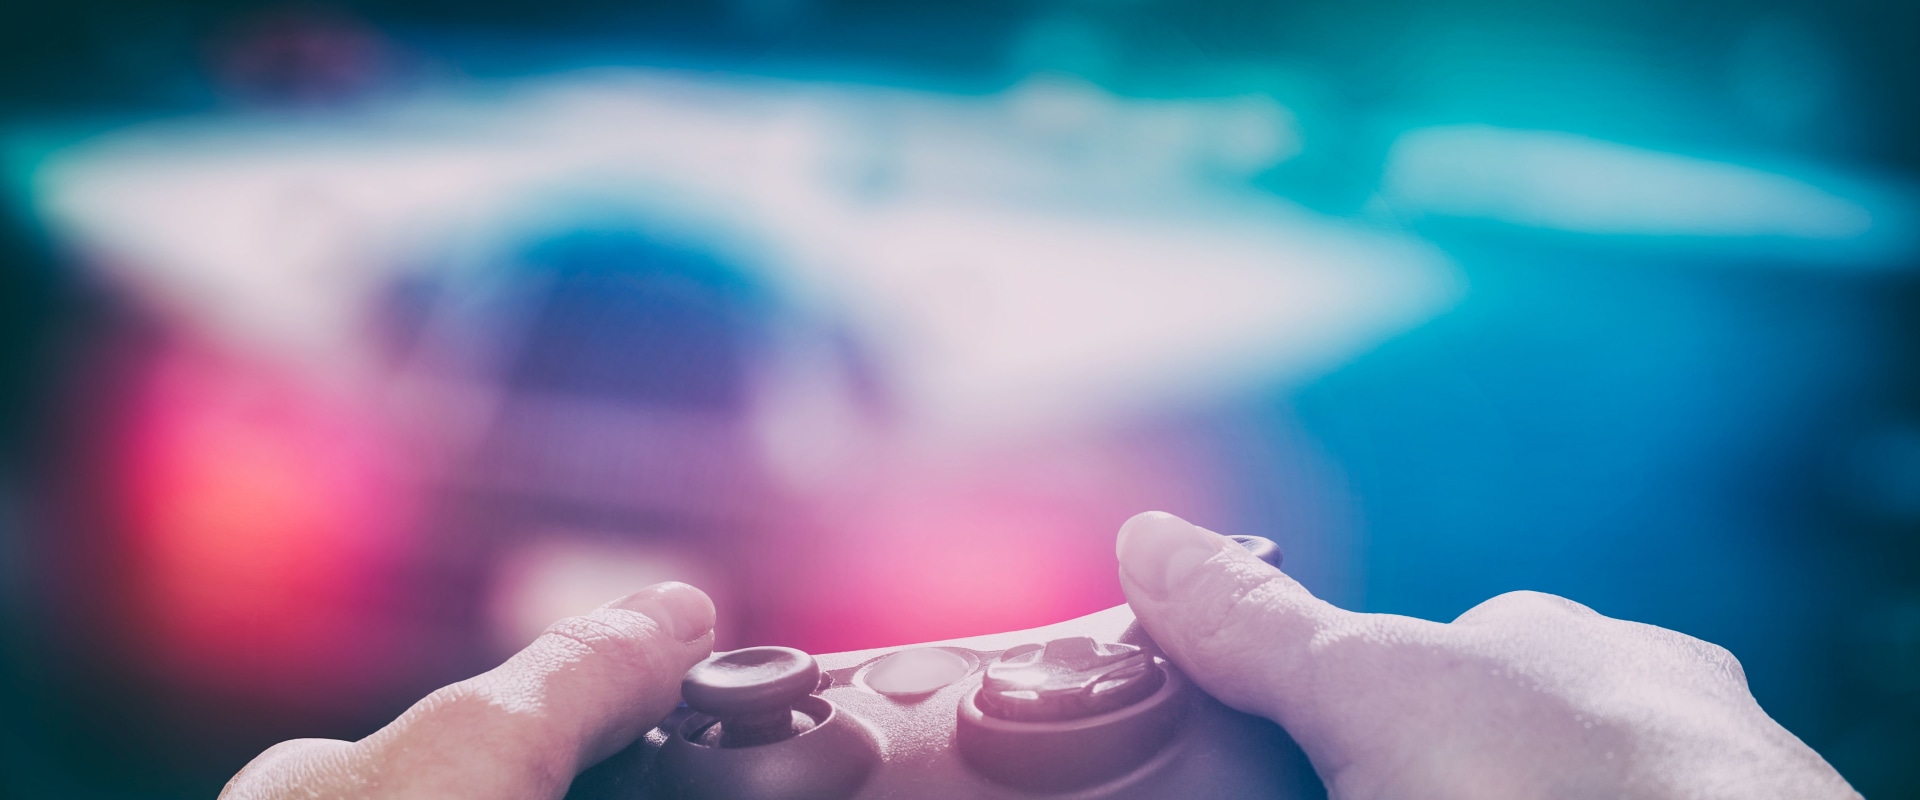 Why Online Games are So Addictive